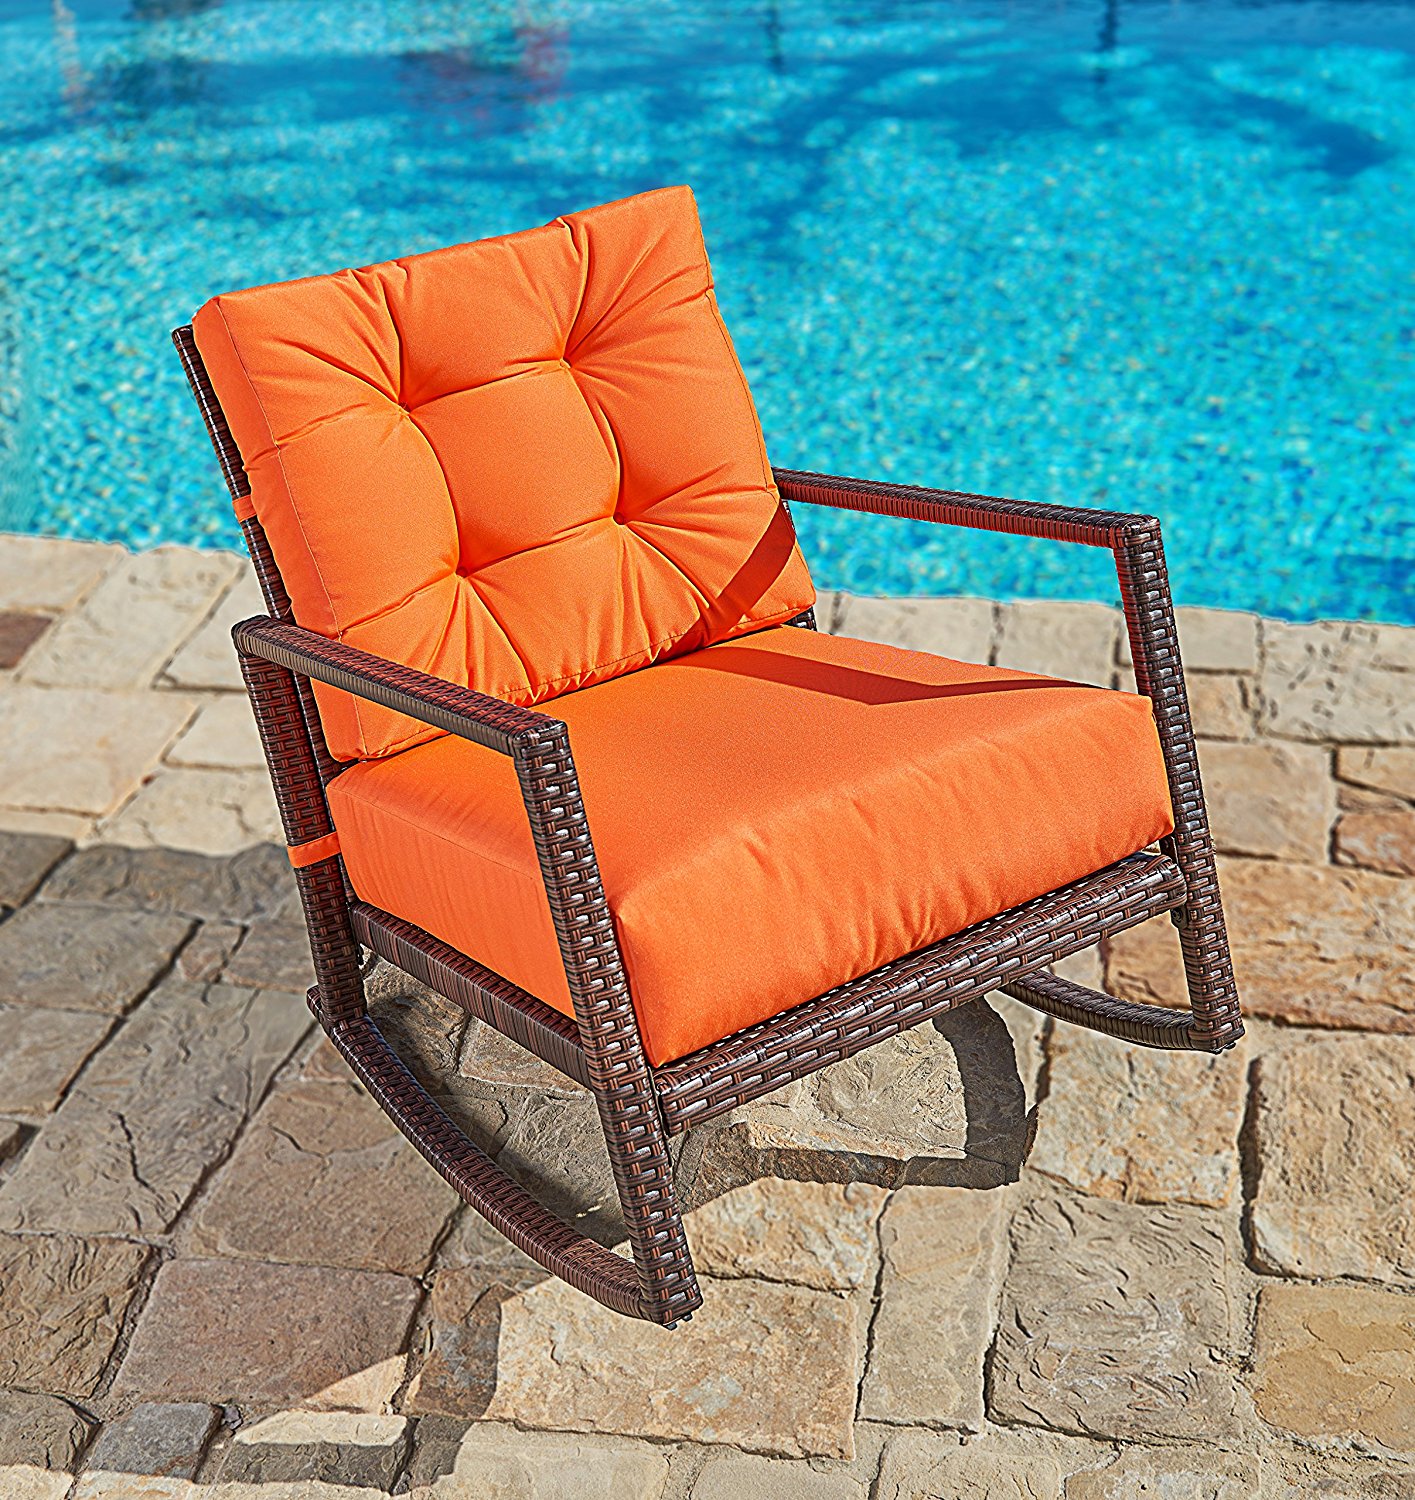 Review of Suncrown Outdoor Furniture Vibrant Orange Patio Rocking Chair